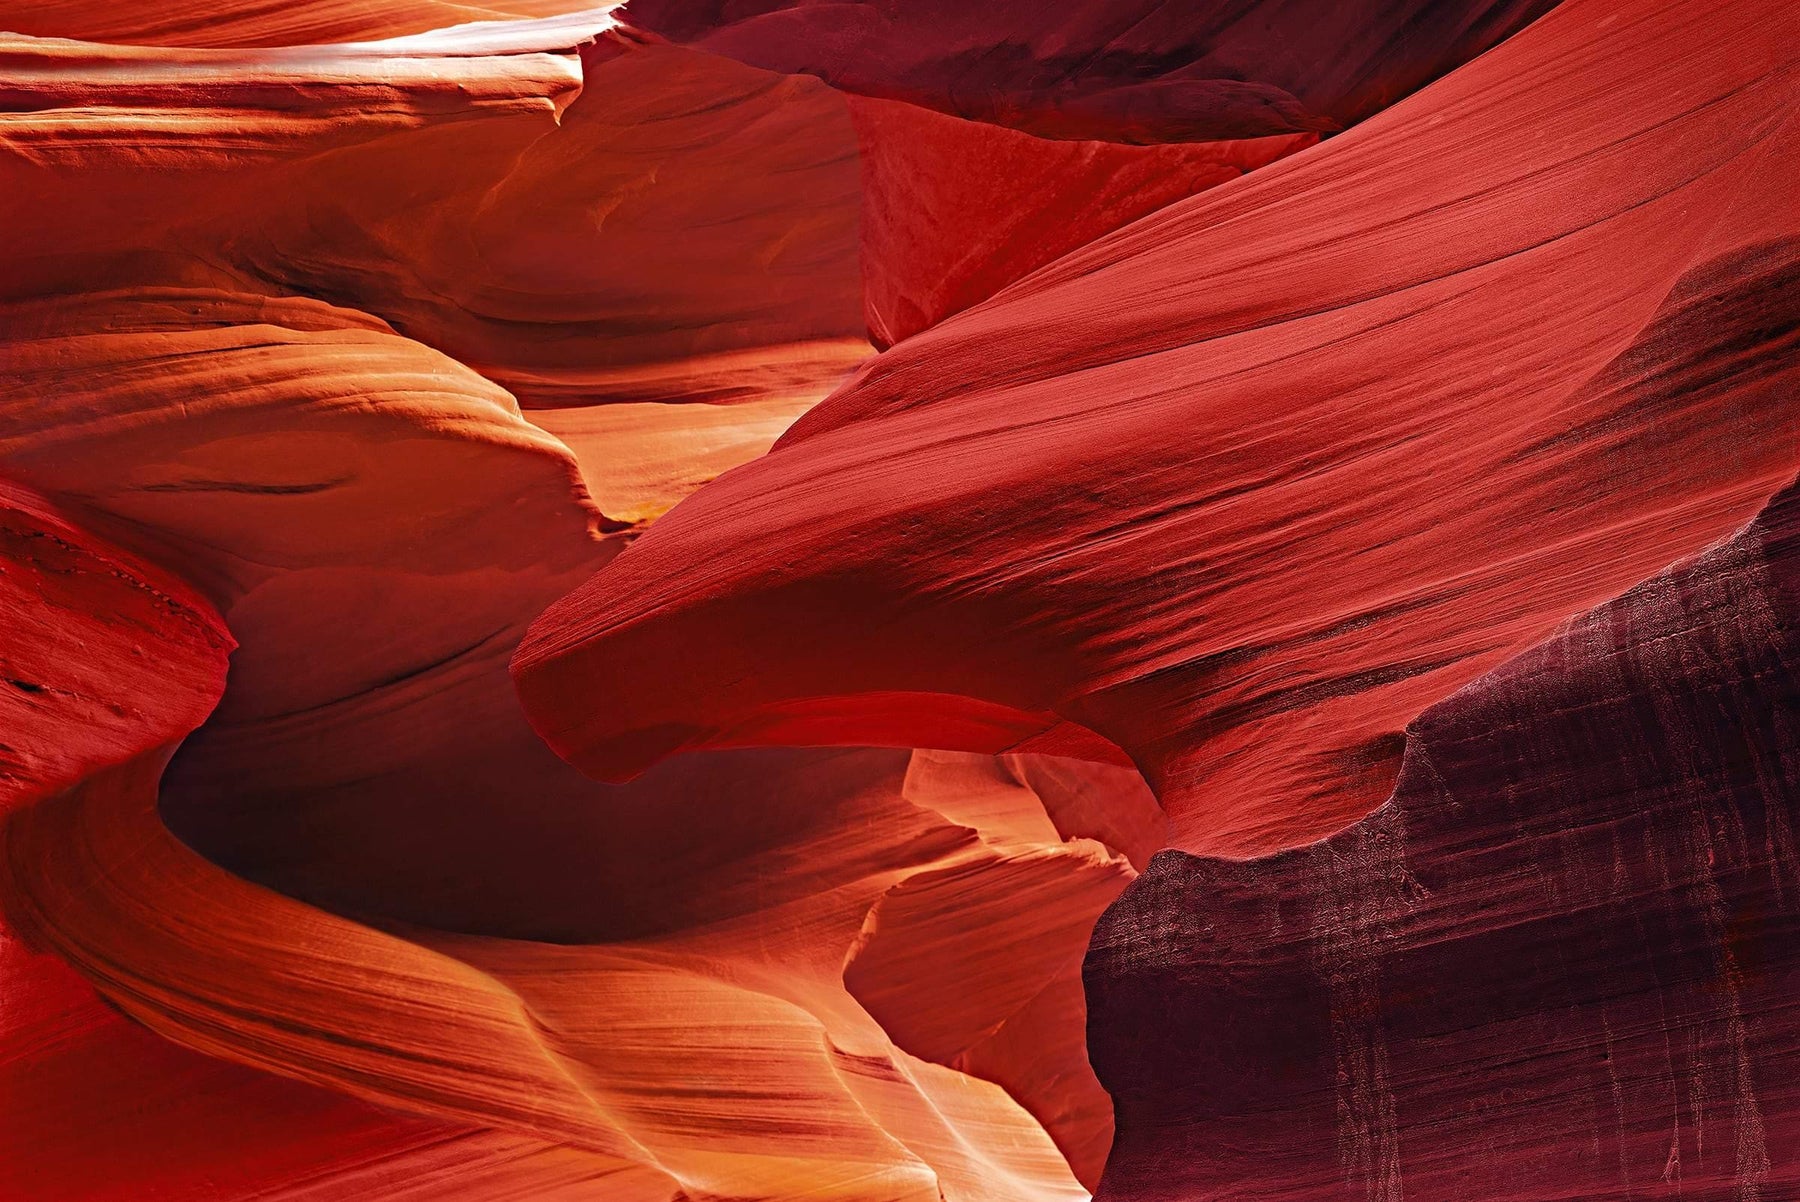 Red and orange eagle shaped sandstone wall within the slot canyons in Antelope Canyon Arizona